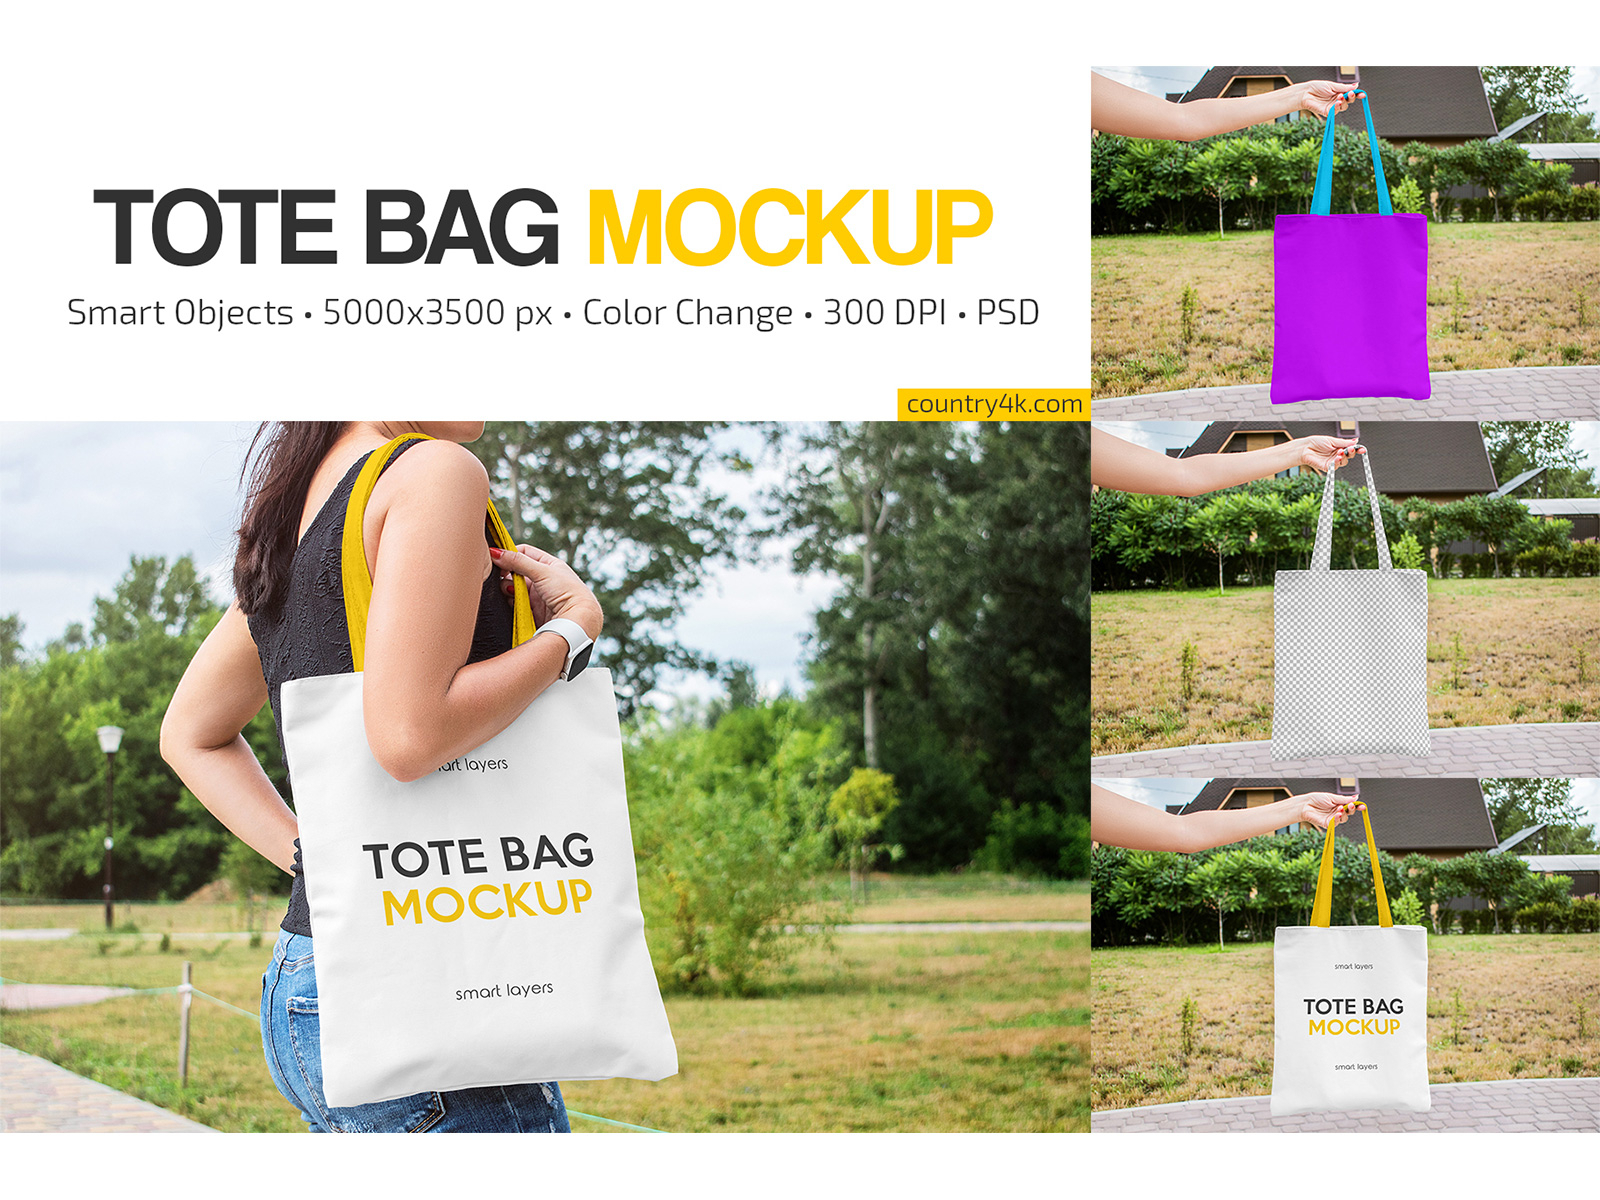 Tote Bag Mockup Set by Country4k on Dribbble